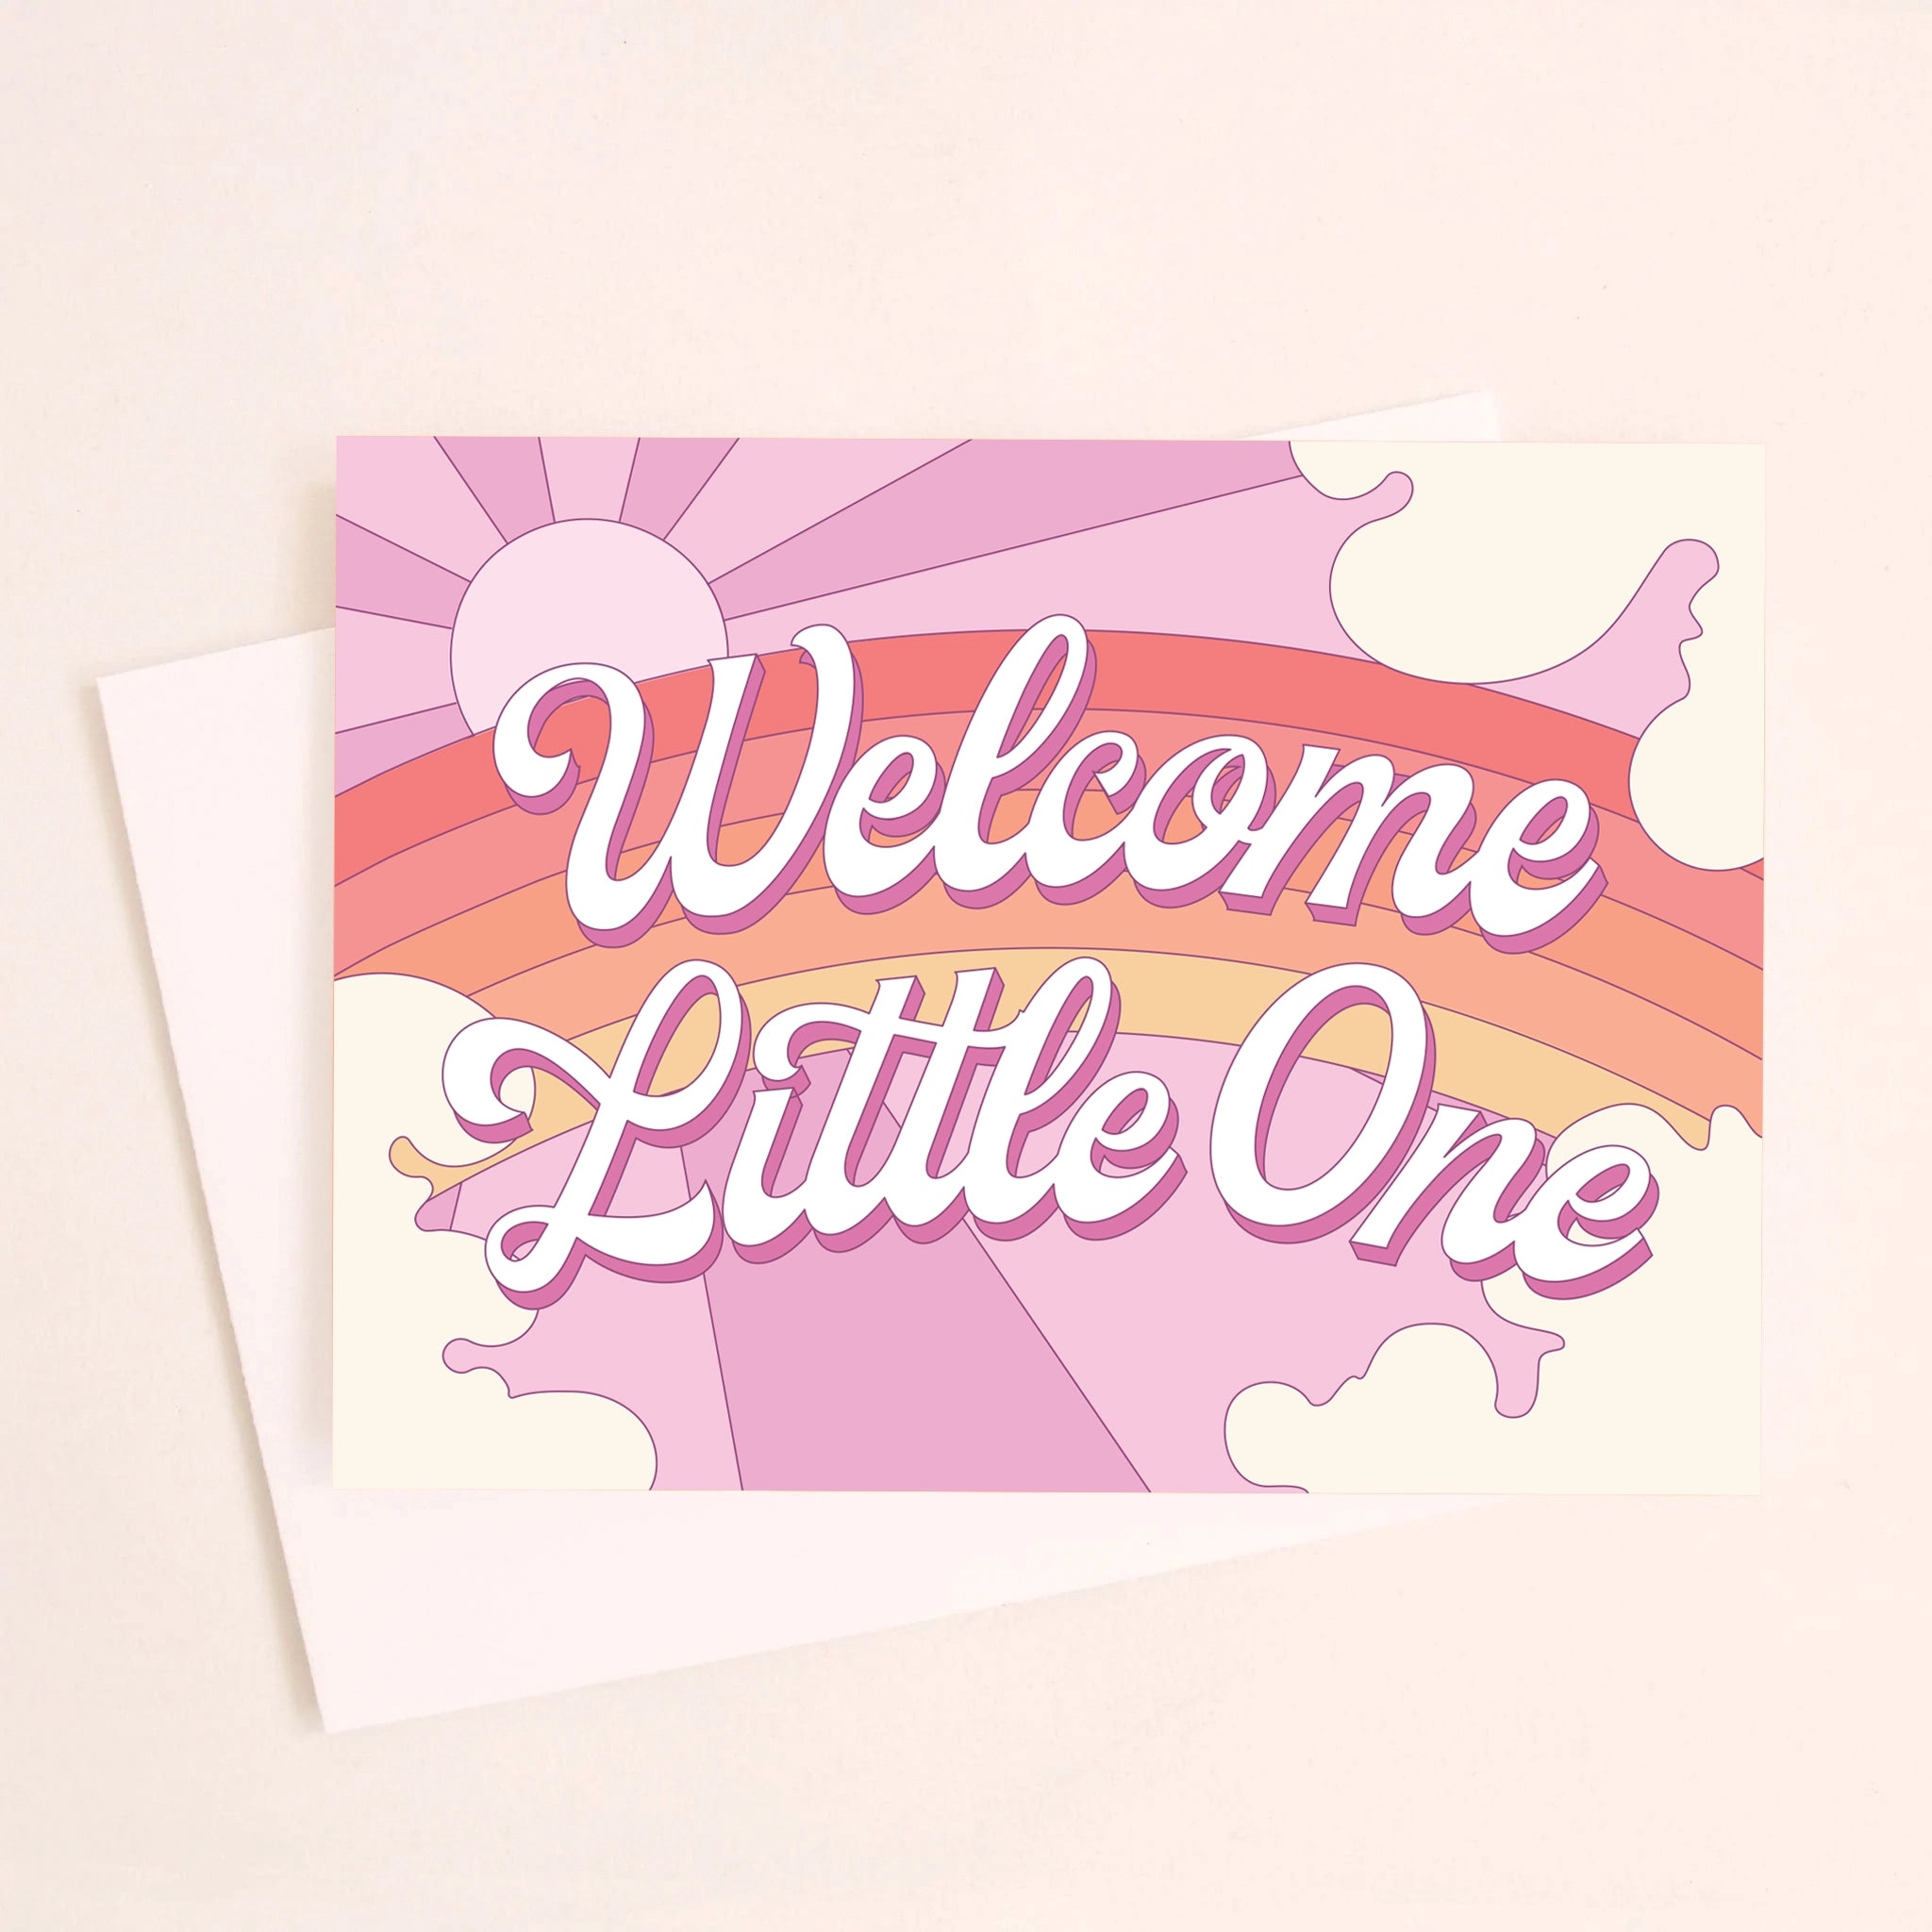 On a light pink background is a greeting card featuring a rainbow and sun graphic and white text in the center that reads, &quot;Welcome Little One&quot;.